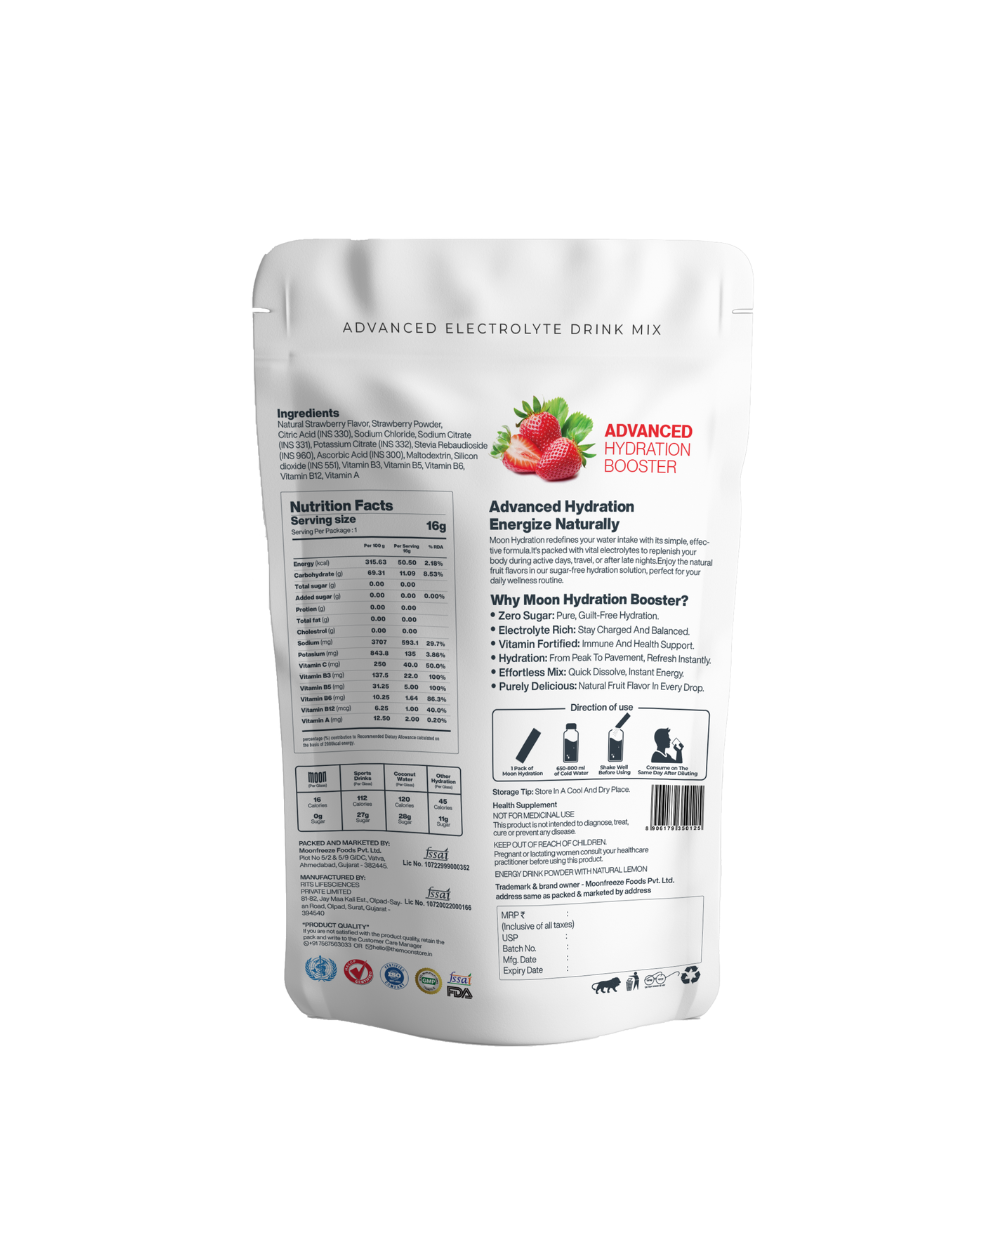 An SEO-friendly Moon Strawberry Lunar Hydration Booster description for dog food featuring a tomato image from MOONFREEZE FOODS PRIVATE LIMITED.